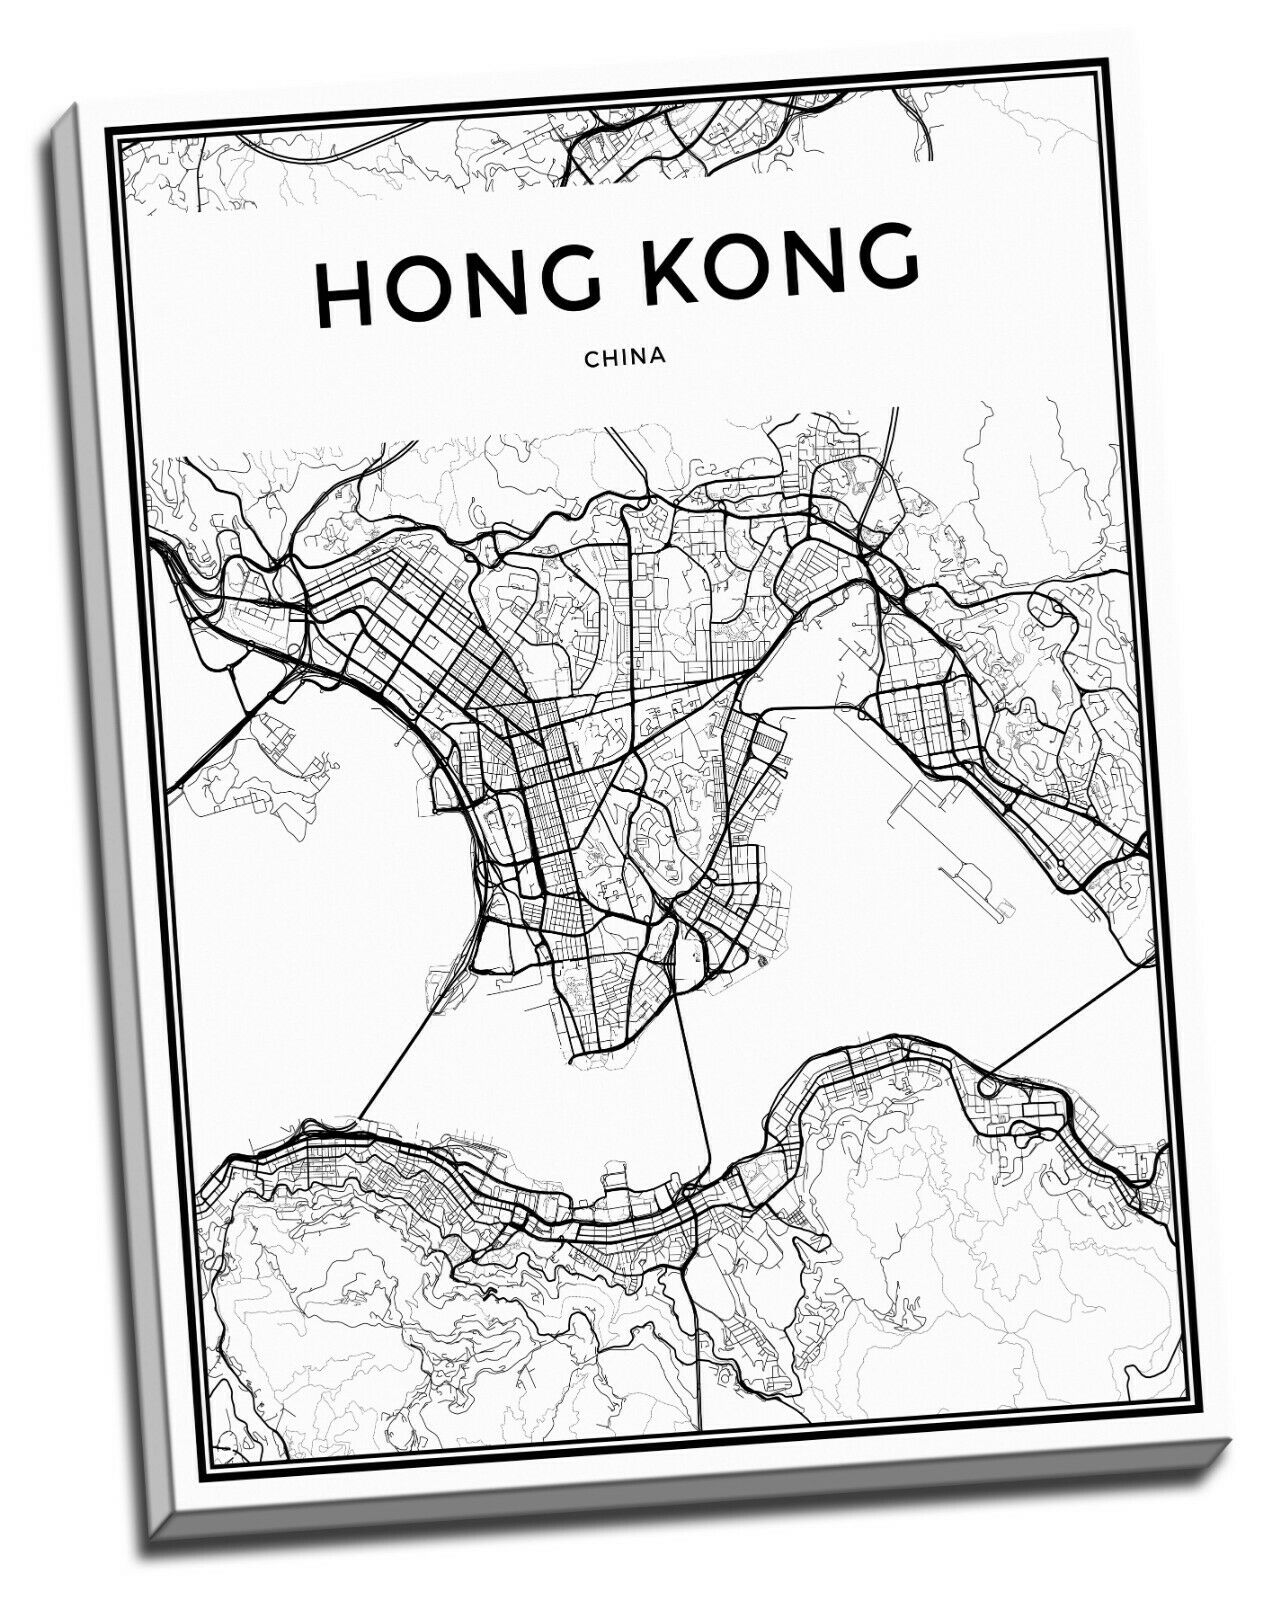 Famous City Line drawing Stretched Canvas Prints Wall Art Home Office Decor